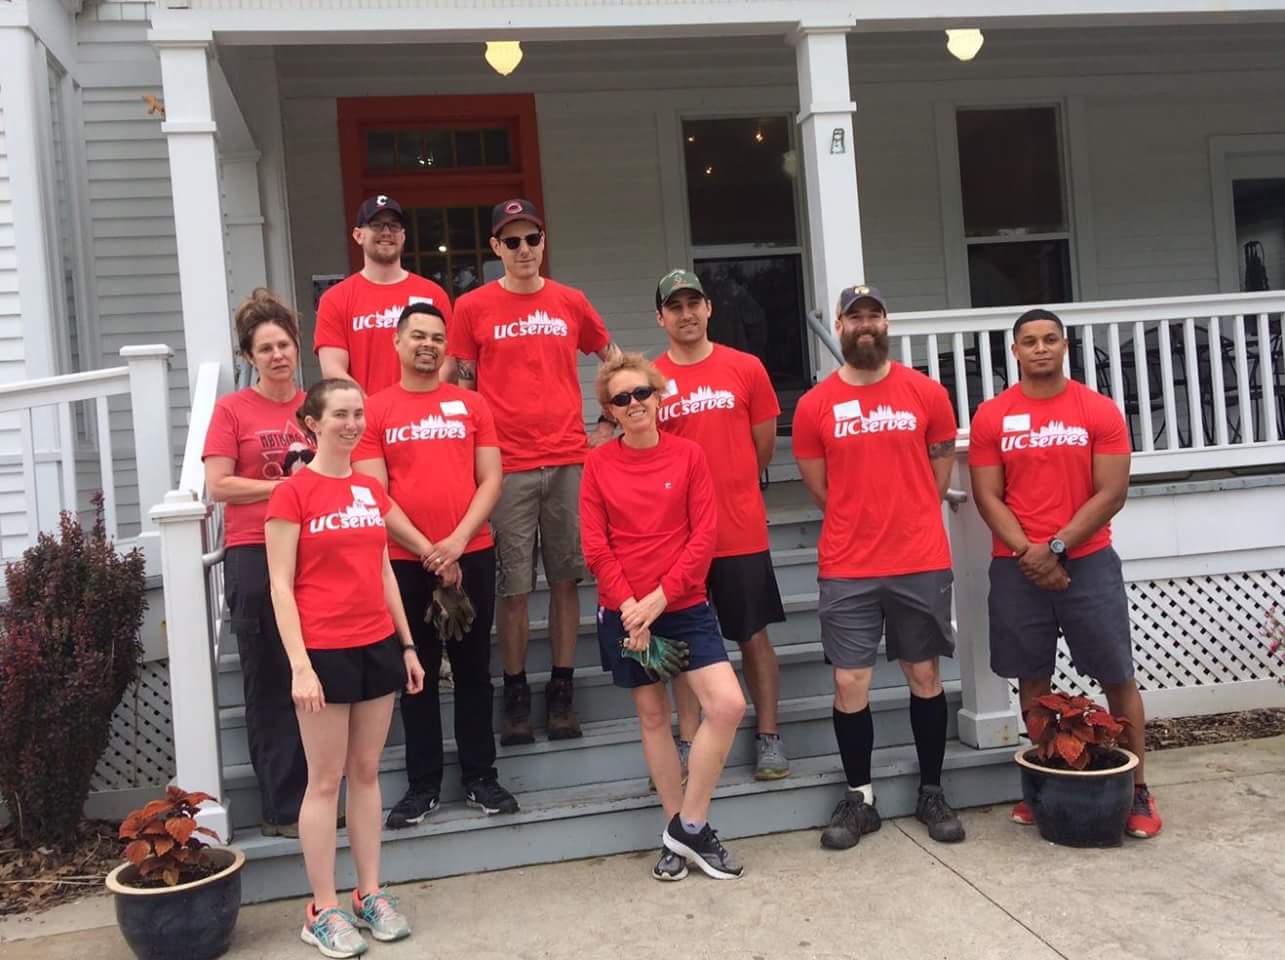 Group photo of UC Serves volunteers on outside steps